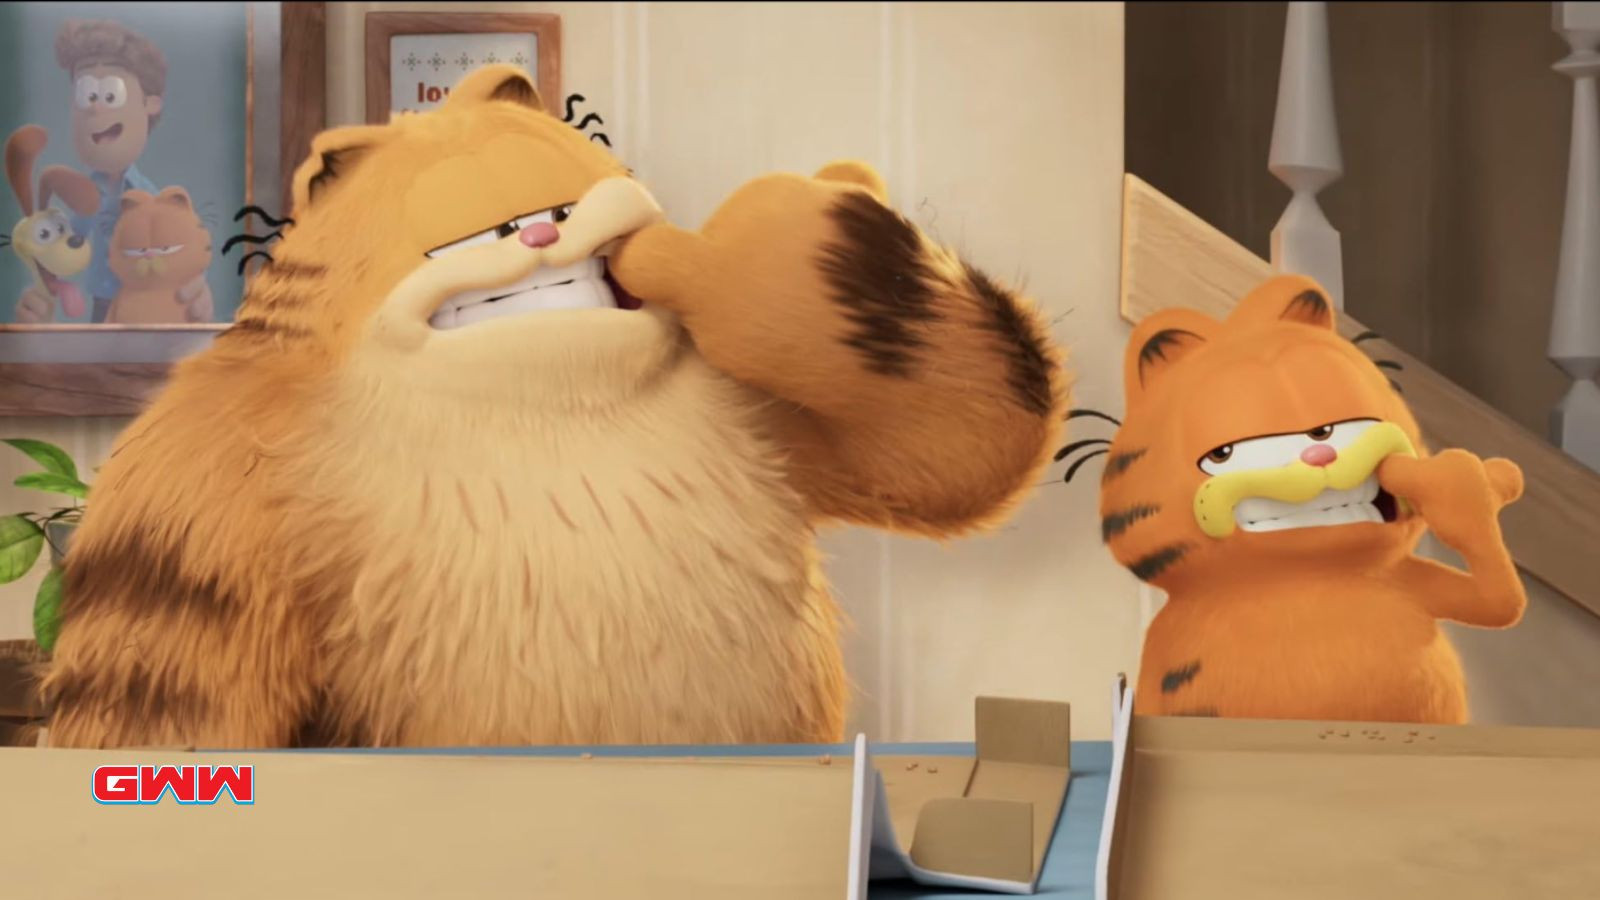 Vic and Garfield together, The Garfield Movie trailer